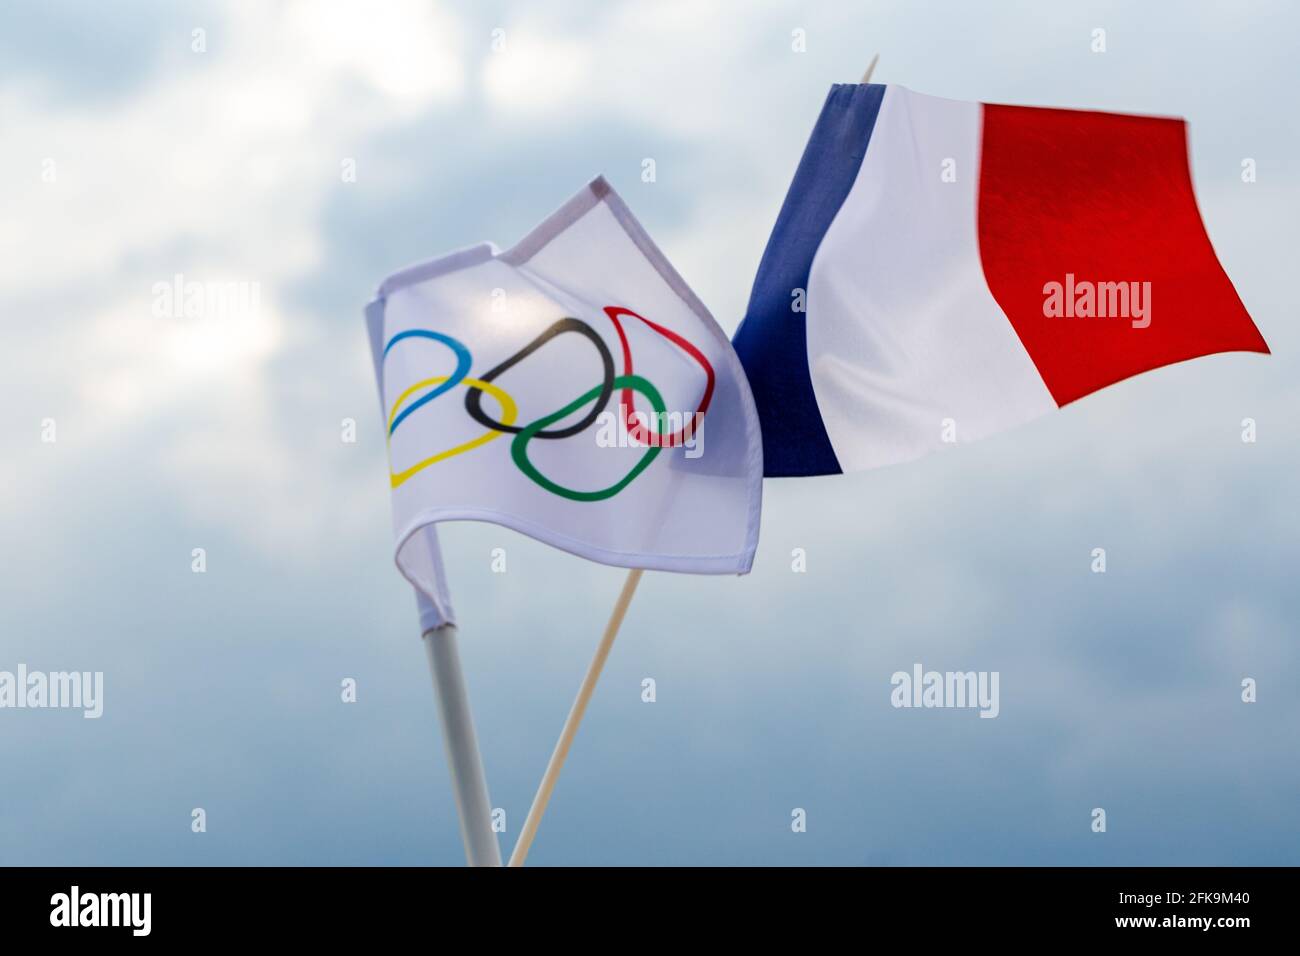 Fan waving the national flag of  France and the Olympic flag with symbol olympics rings. Stock Photo